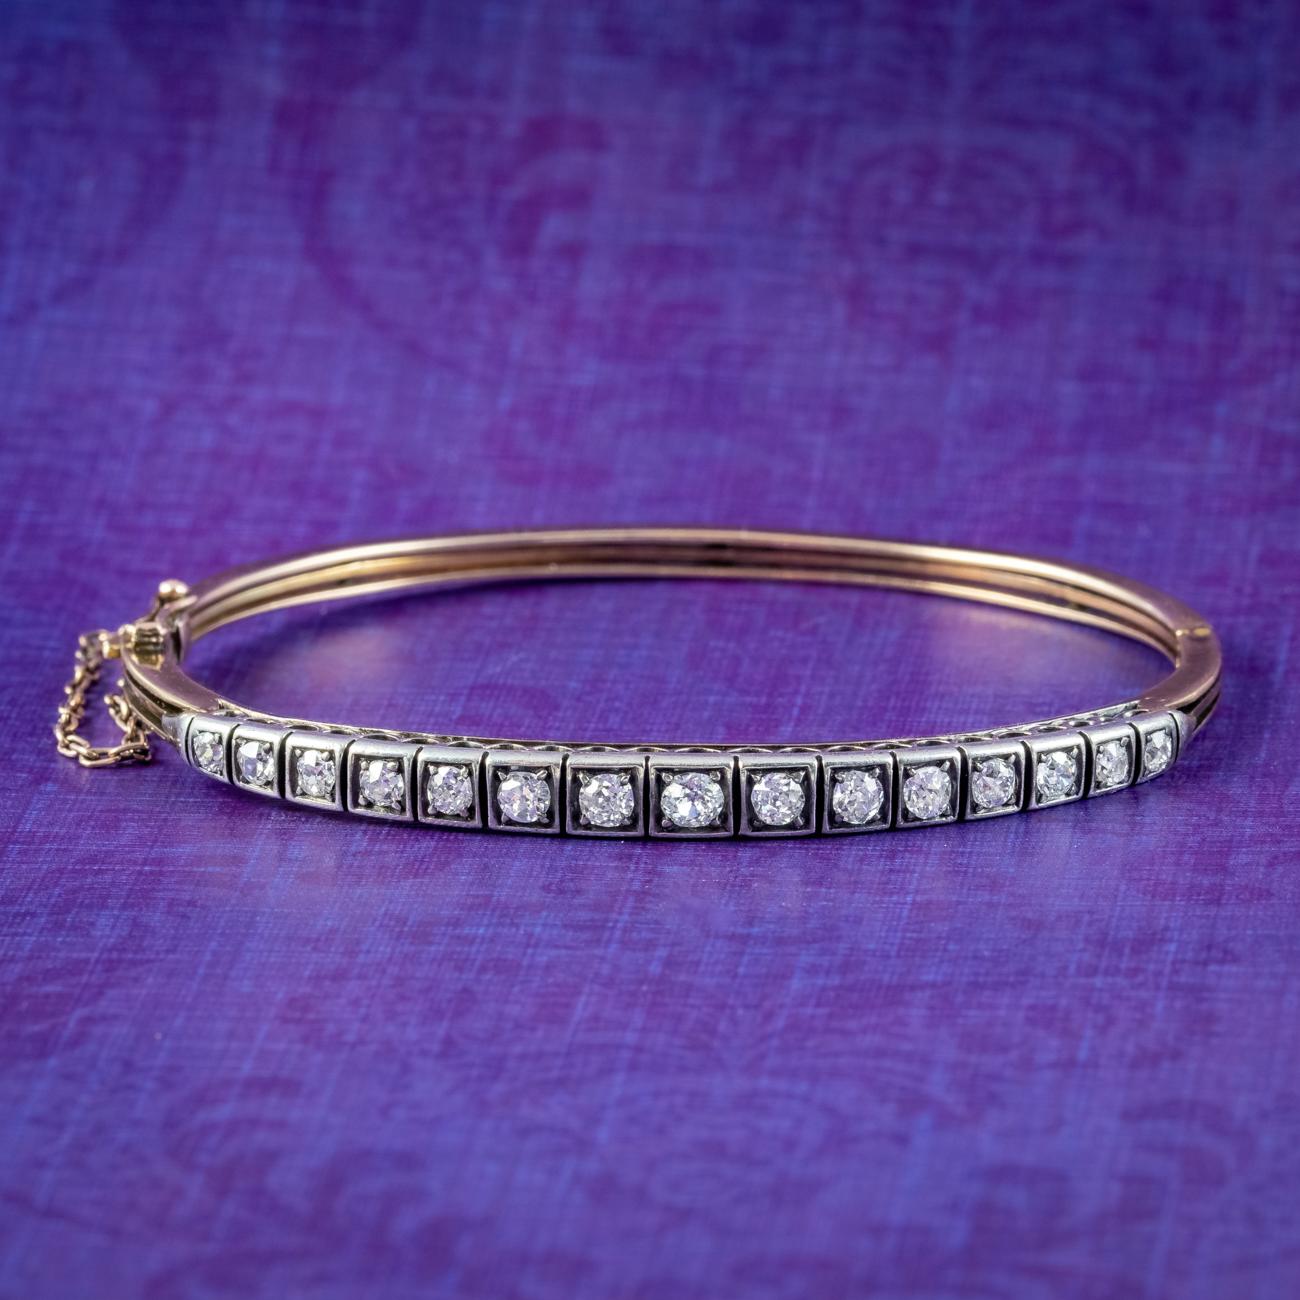 A stunning antique Victorian bangle from the late 19th Century lined with fifteen sparkling old mine cut diamonds along the front with SI1 clarity – H colour. They graduate in size from 0.06 to 0.15ct in the centre and total approx. 1.3ct.

Diamonds